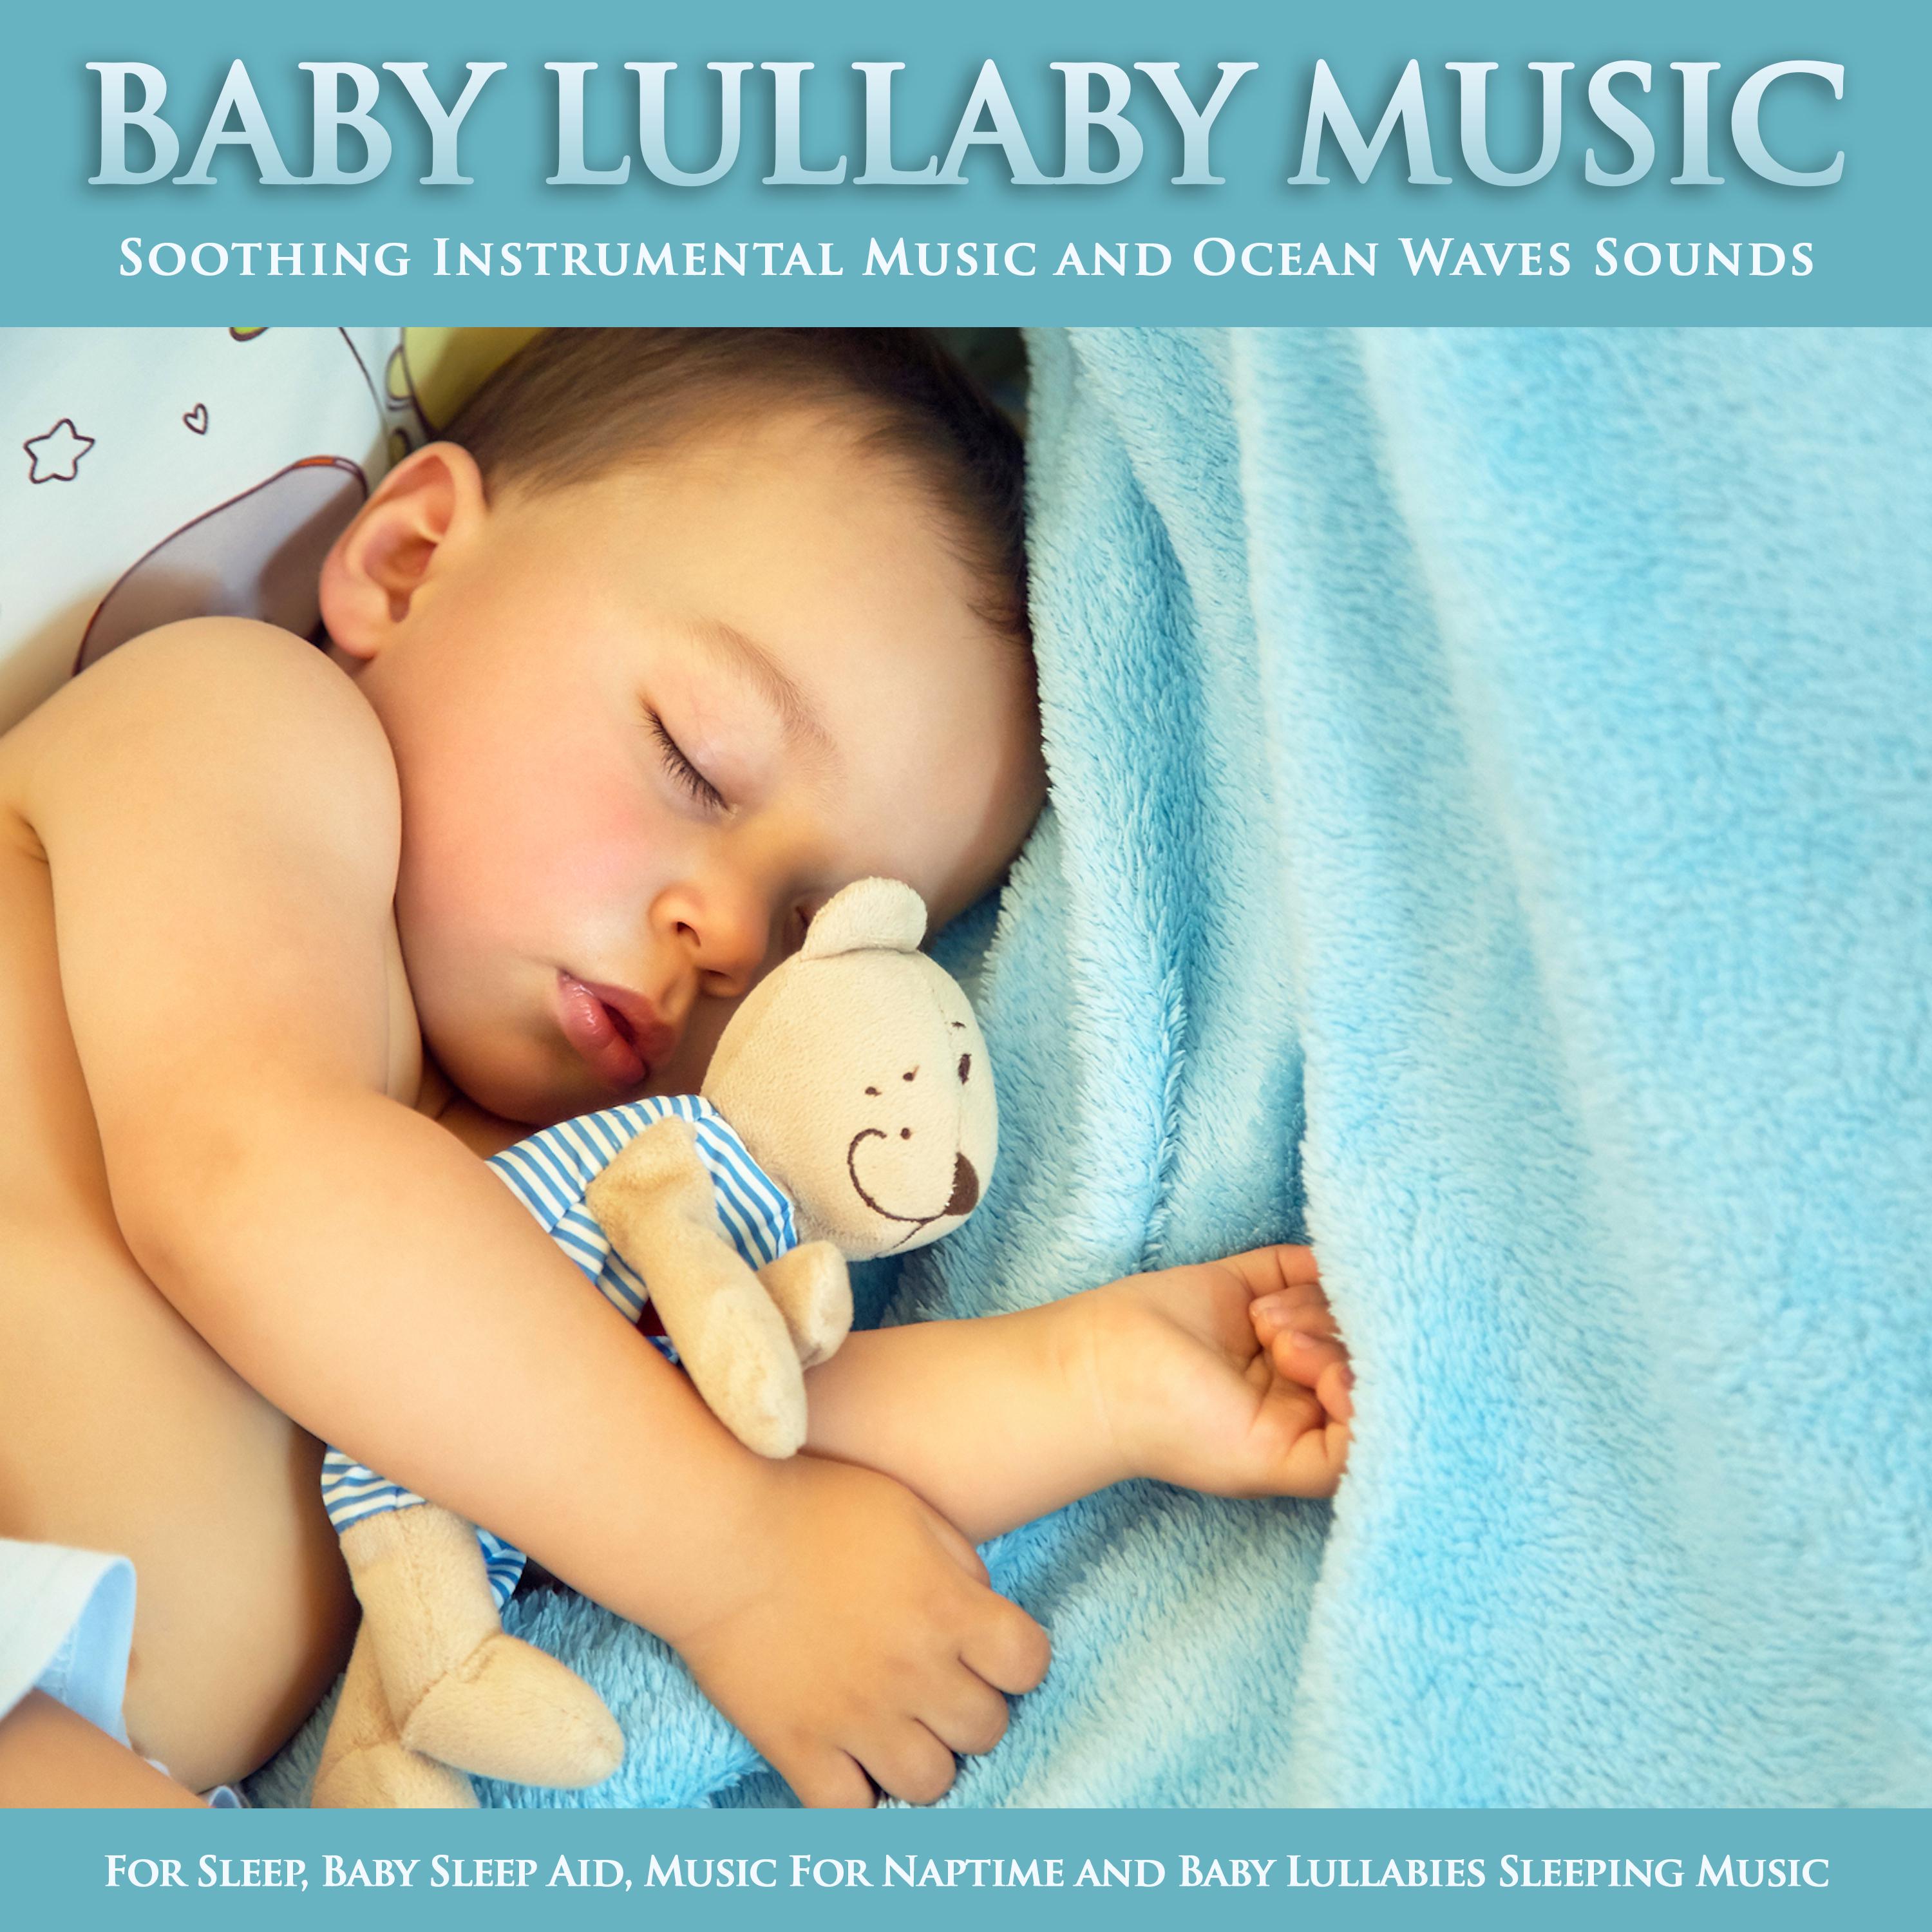 Baby Lullabies and Sounds of Ocean Waves